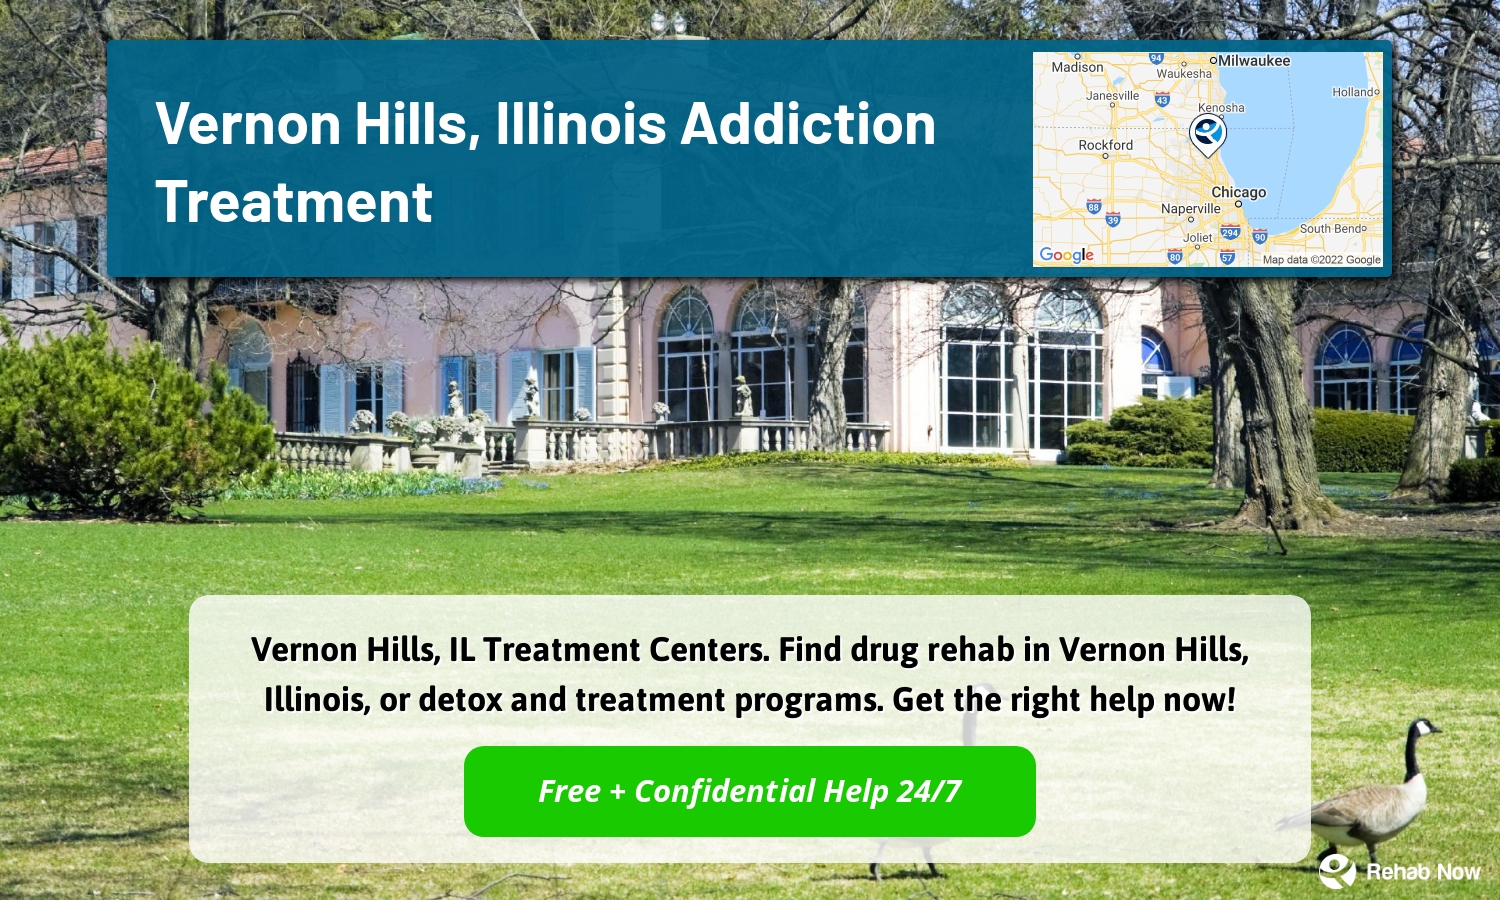 Vernon Hills, IL Treatment Centers. Find drug rehab in Vernon Hills, Illinois, or detox and treatment programs. Get the right help now!